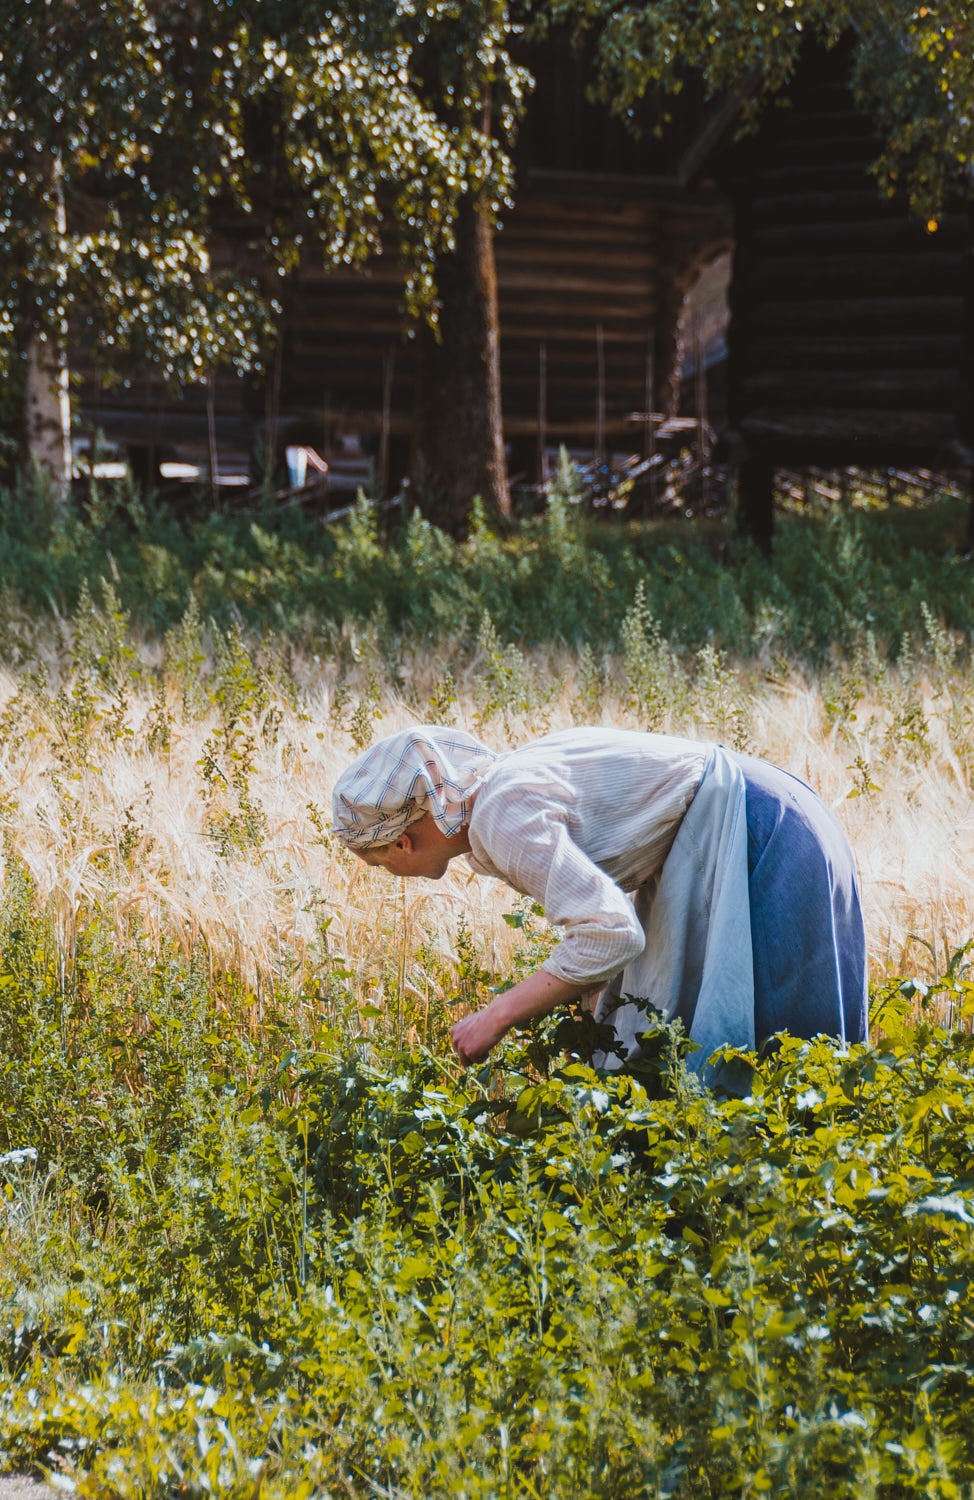 Woman picking herbs from her own garden